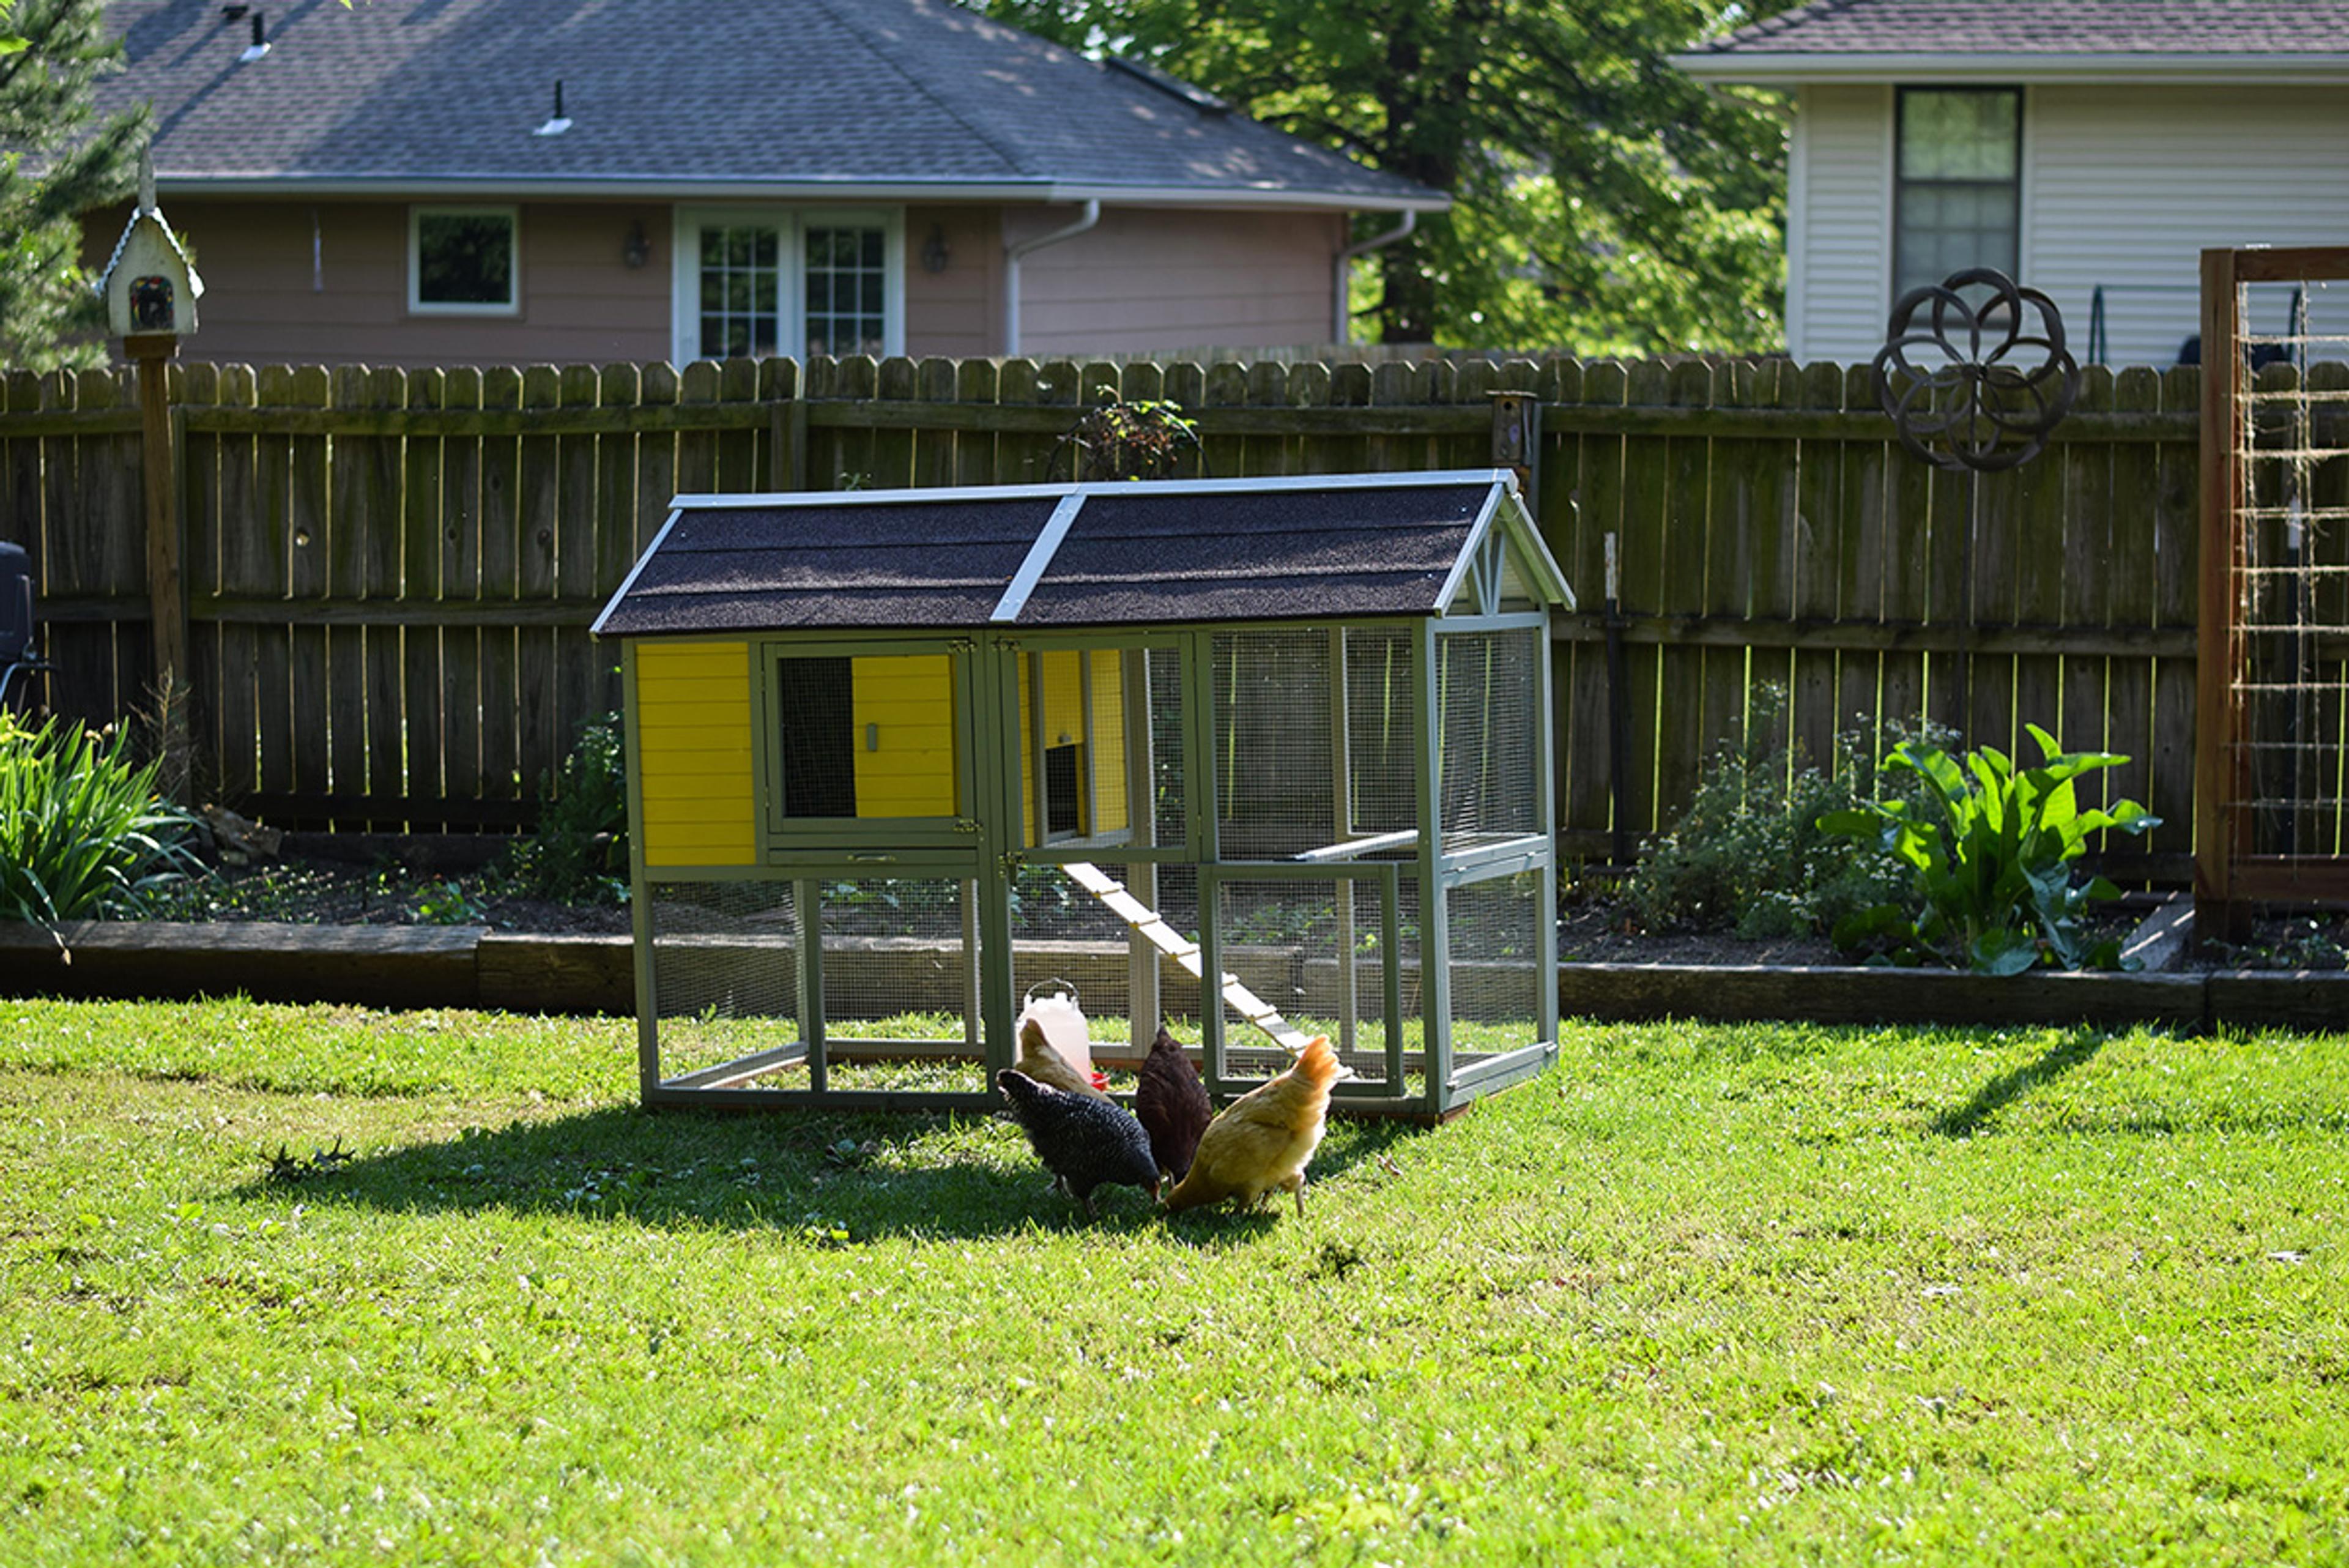 A yellow and green backyard chicken coop with four chickens pecking in the grass nearby. 